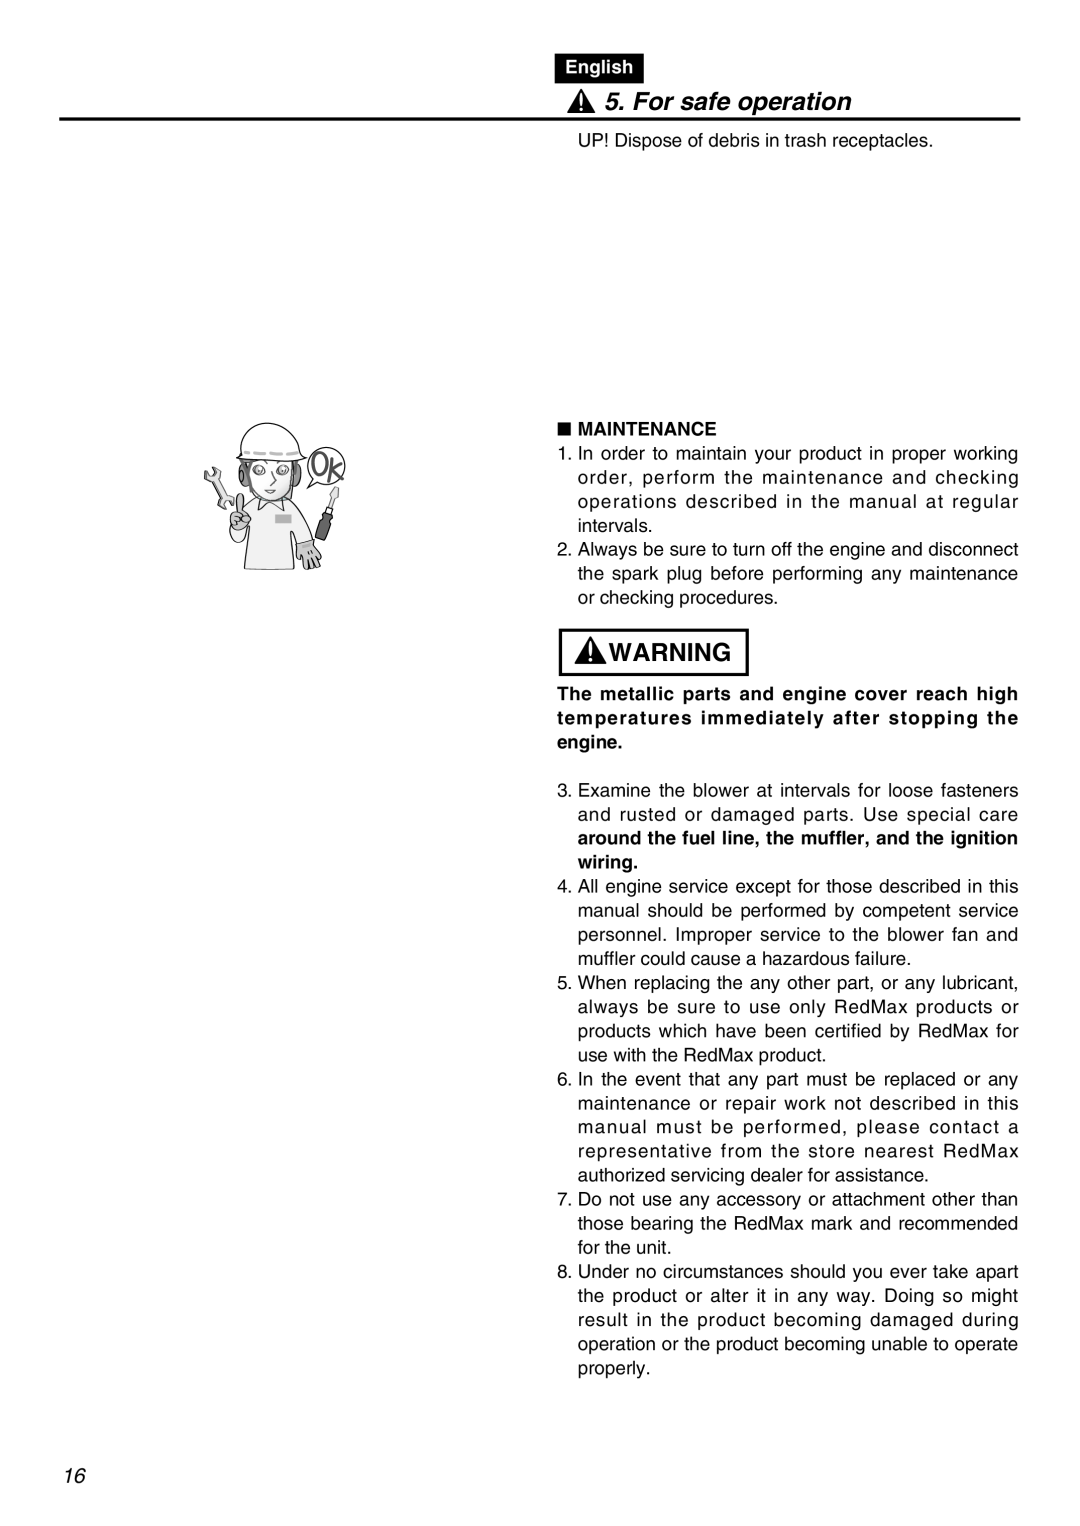 RedMax HBZ2601 manual For safe operation, English, Maintenance 